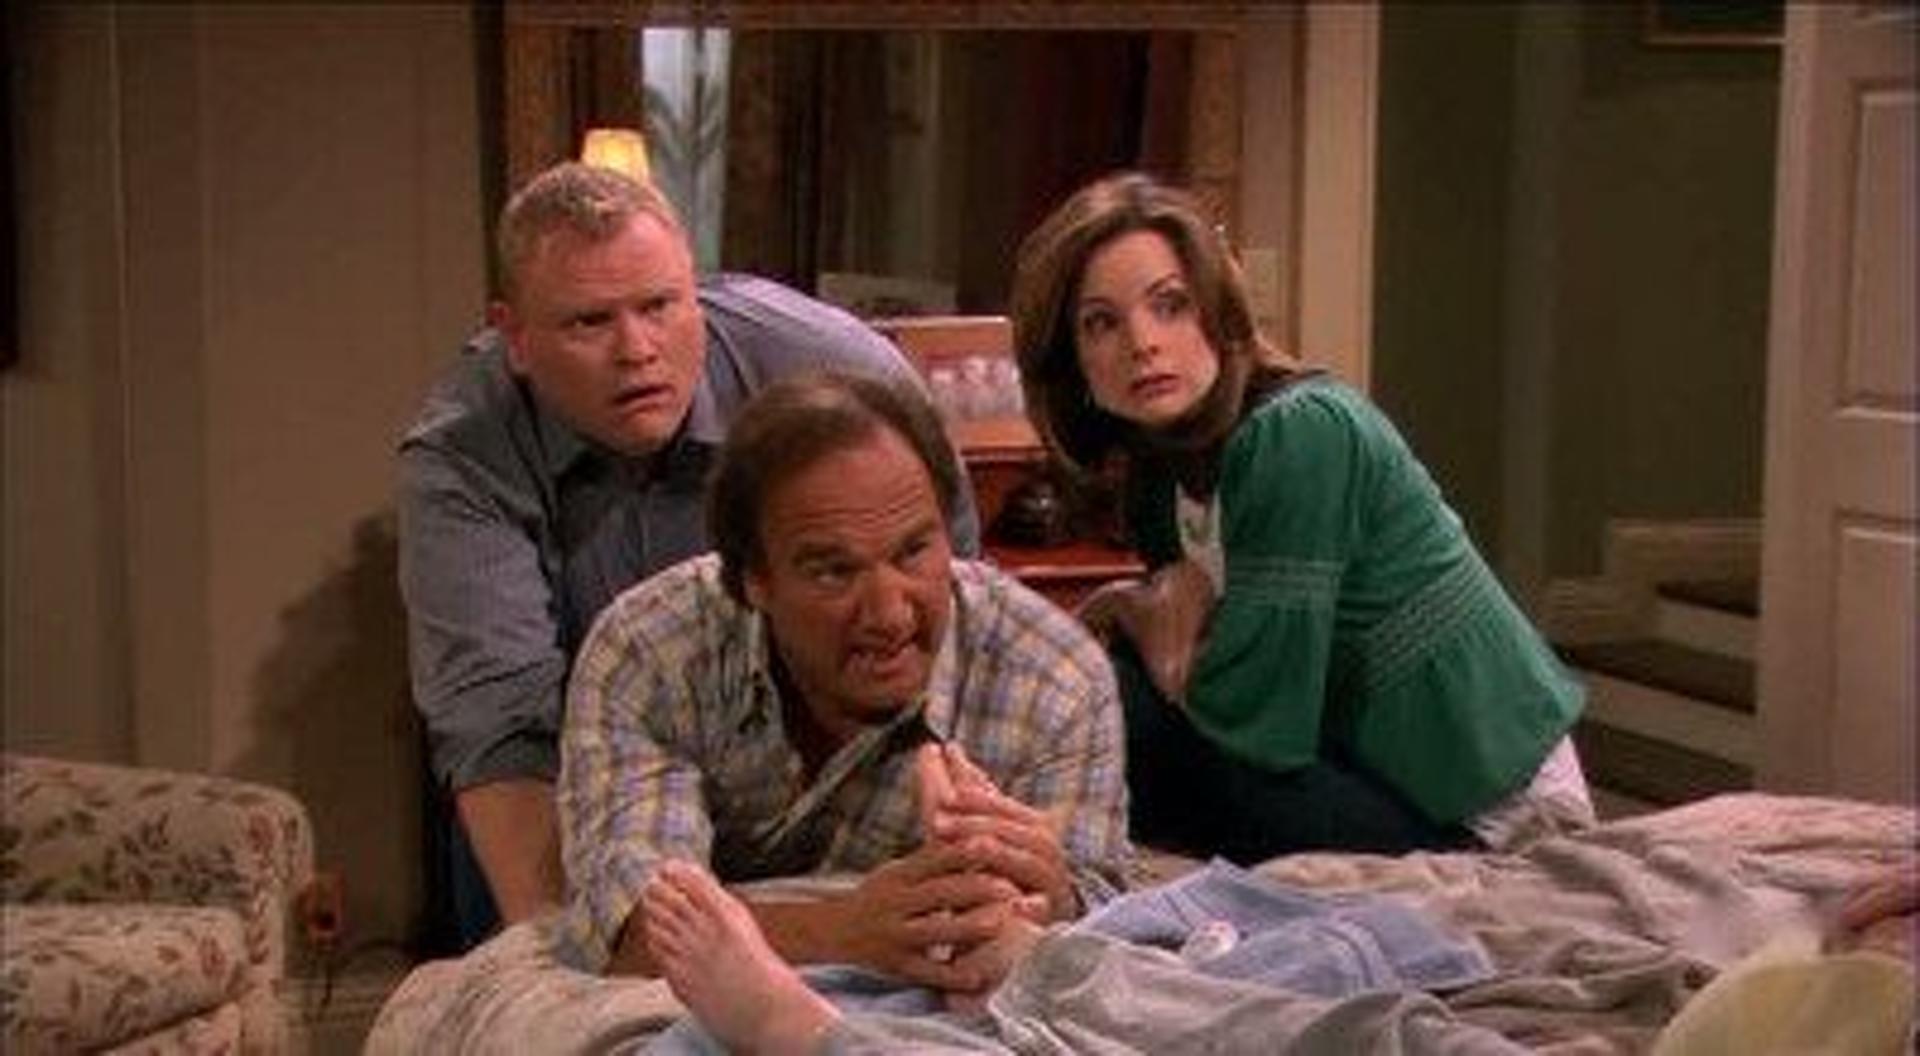 According to Jim (S07E16): The Cheater Summary: Cheryl insists on playing a...